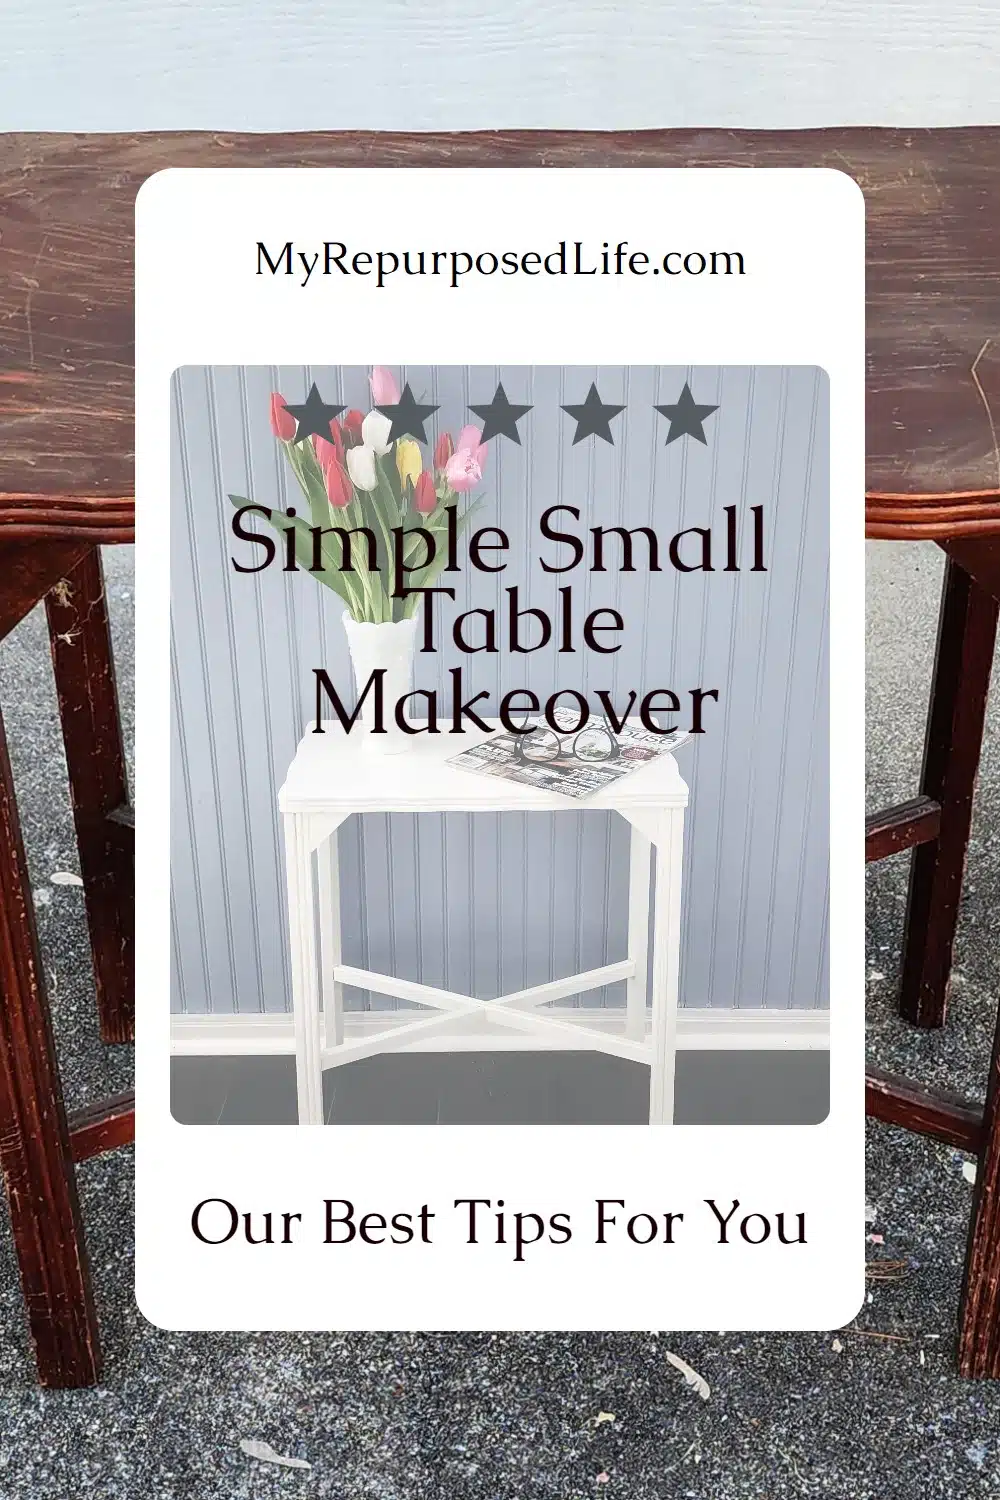 Upgrade your home decor with DIY small table makeover ideas. Budget-friendly tips & step-by-step tutorials for simple transformations. via @repurposedlife